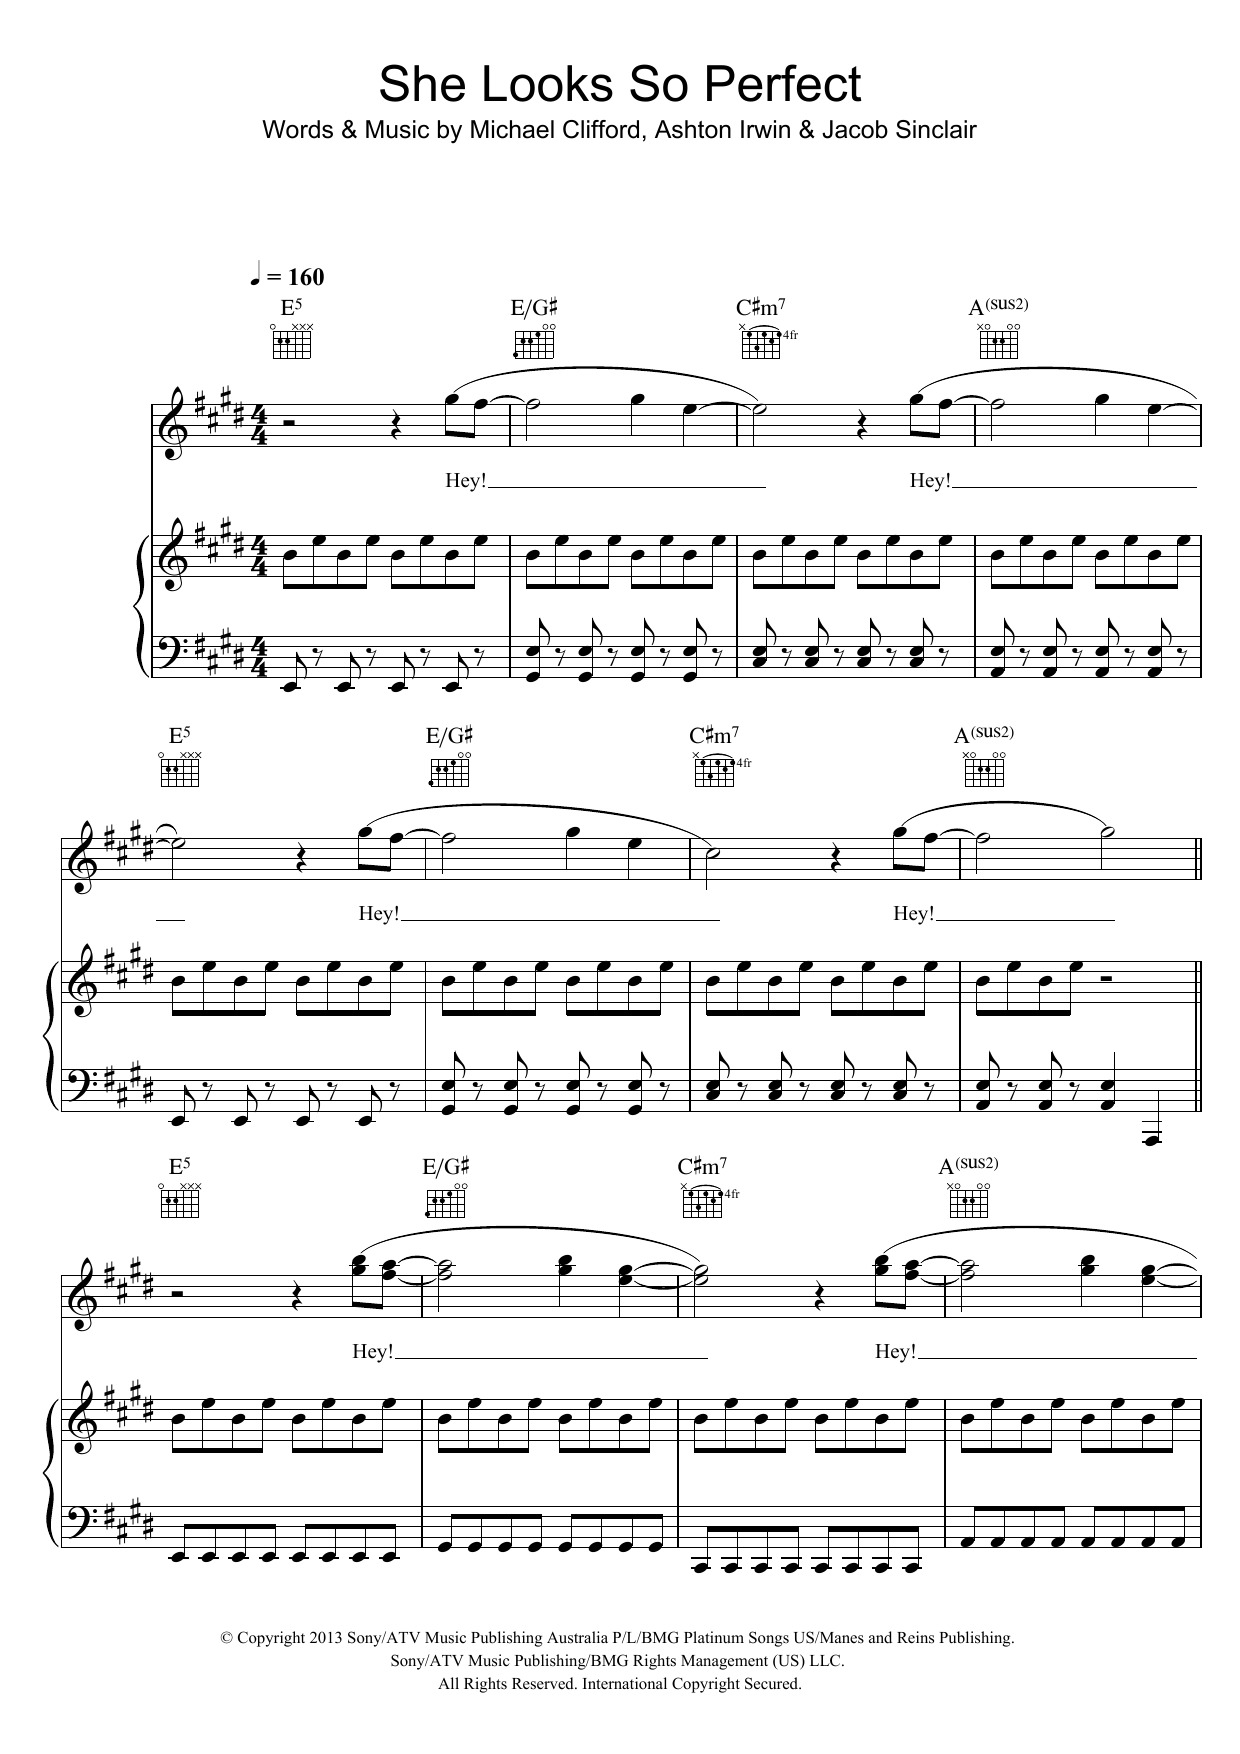 Download 5 Seconds of Summer She Looks So Perfect Sheet Music